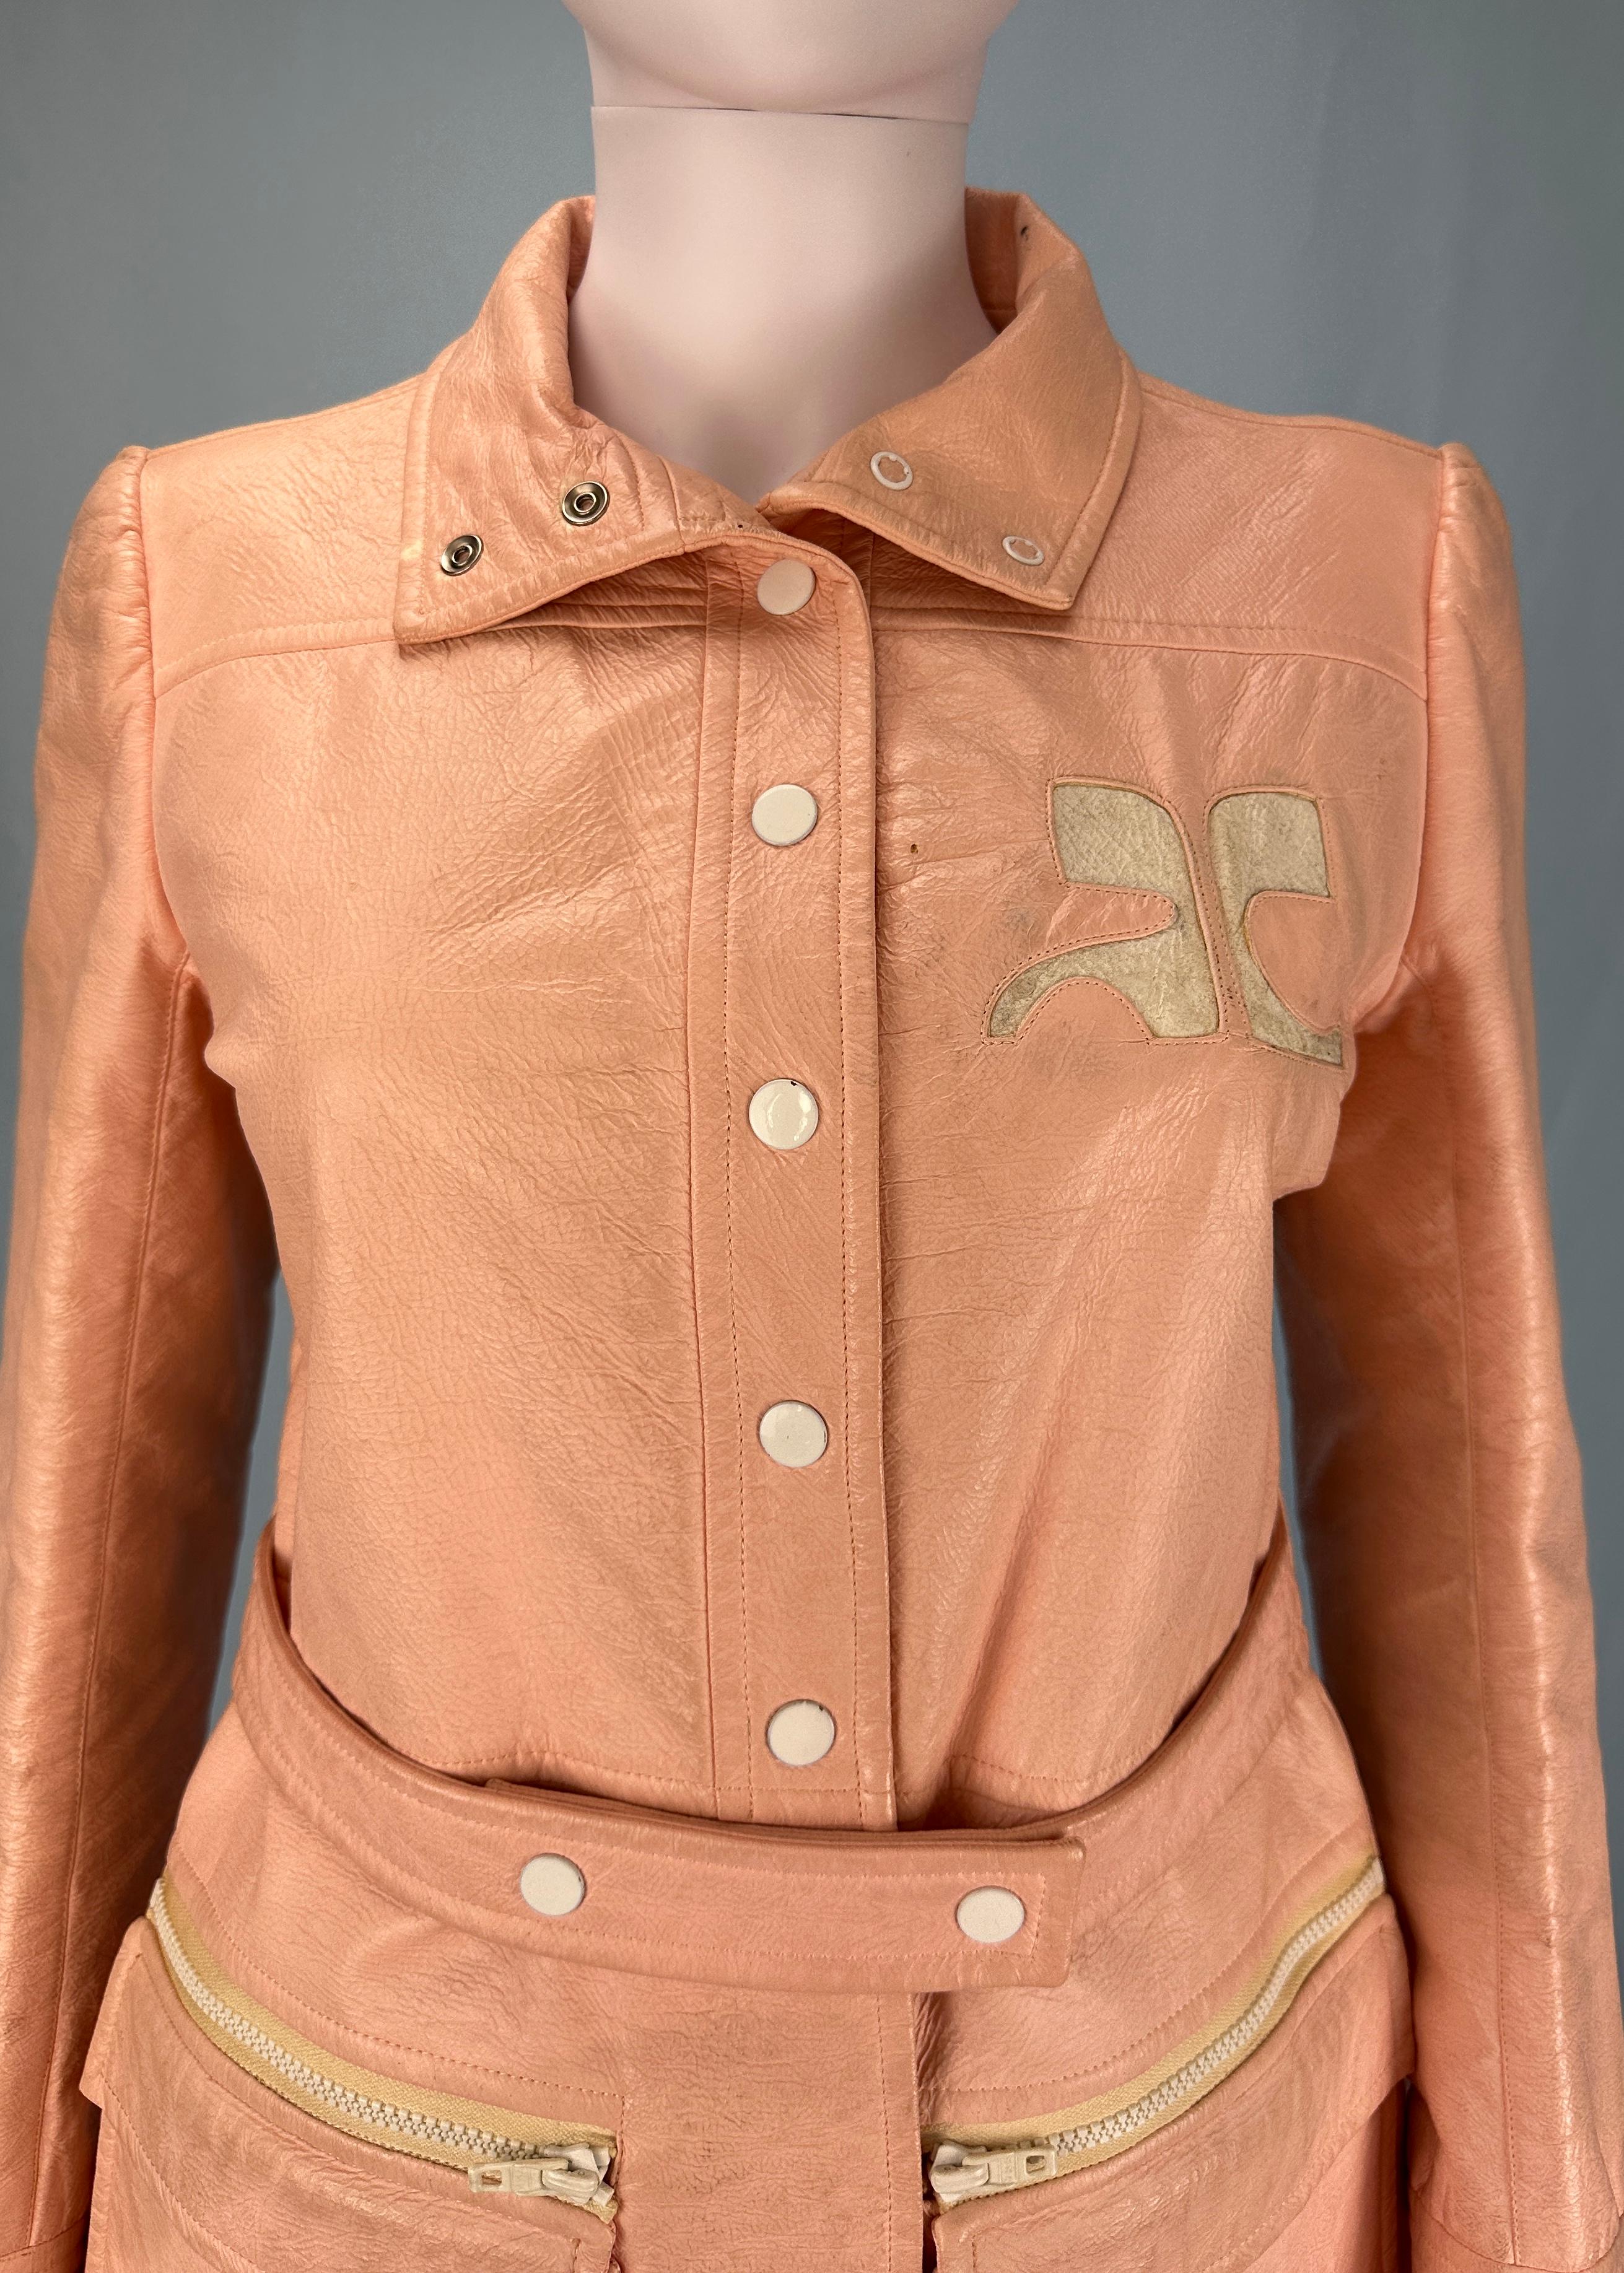 Vintage Andres Courrèges 
1963-1969

Pink peach vinyl jacket 
Large Courrèges logo 
Can be worn as a jacket or dress
Belted (removable) 
Popper buttons

Numbered couture label 
Size “A” - see measurements 

Measurements - 
32” waist when buttoned up